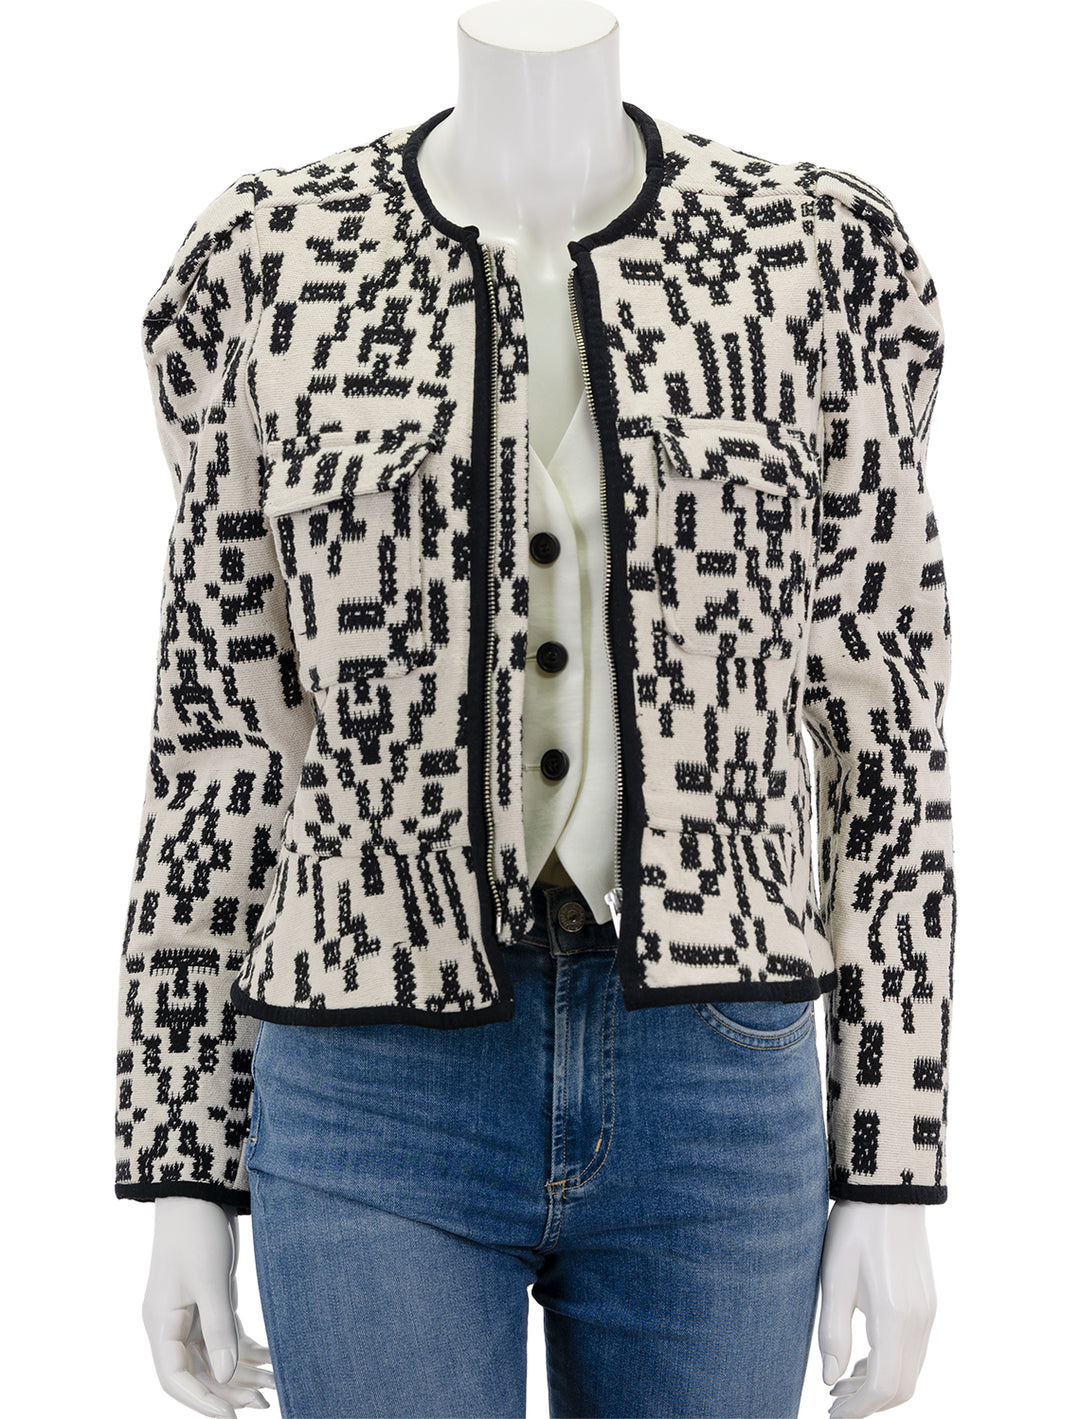 Front view of Isabel Marant Etoile's deliona jacket in black and white, unzipped.